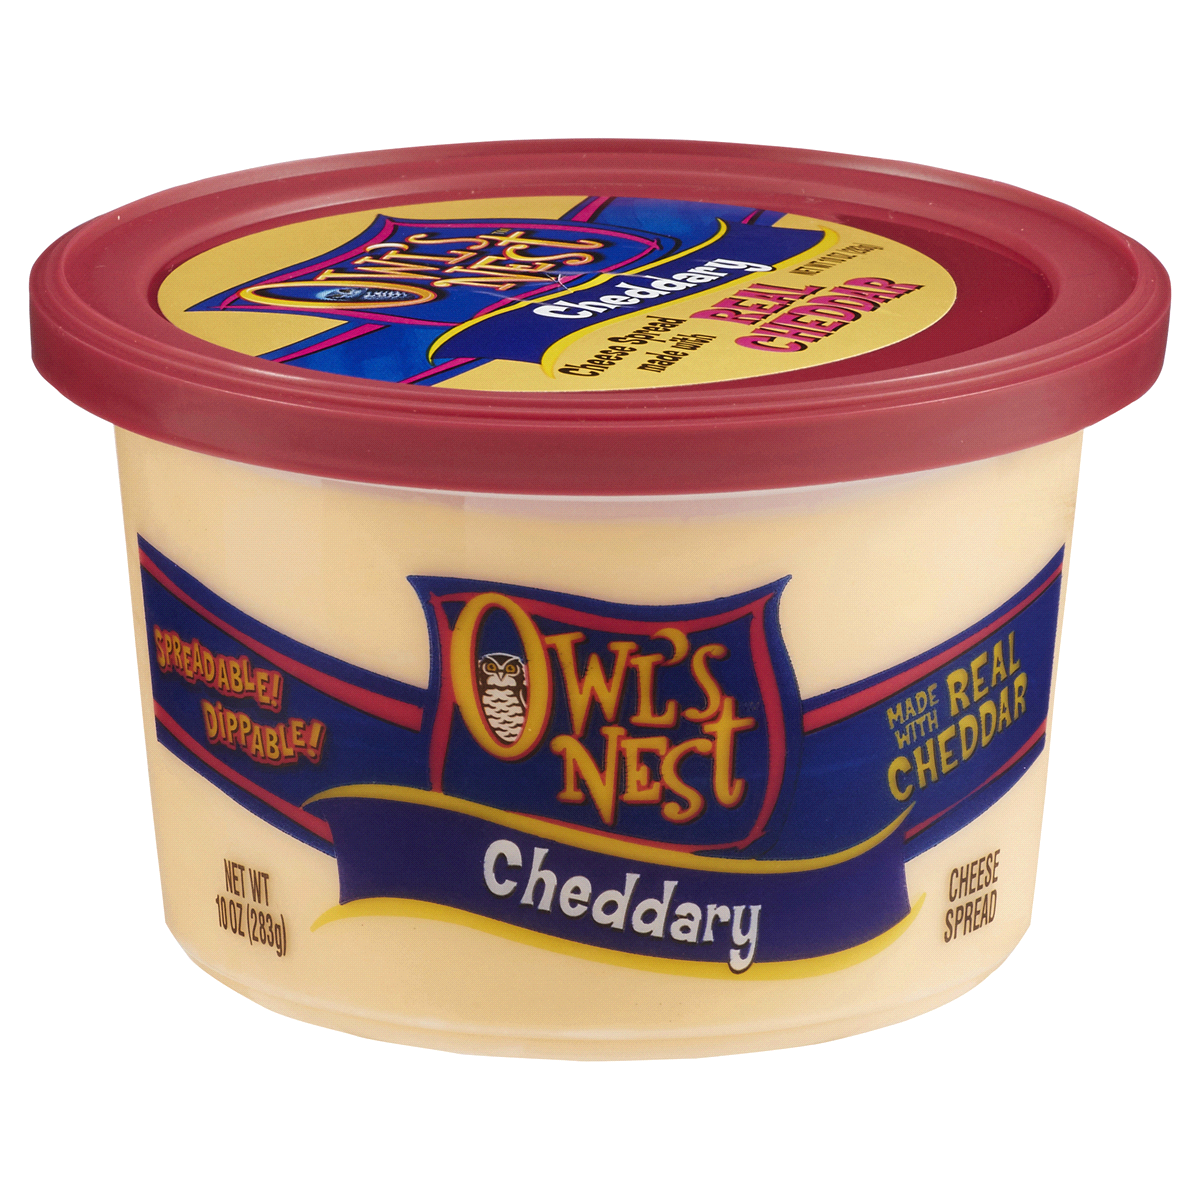 slide 1 of 1, Owl's Nest Cheddary Cheese Spread, 10 oz